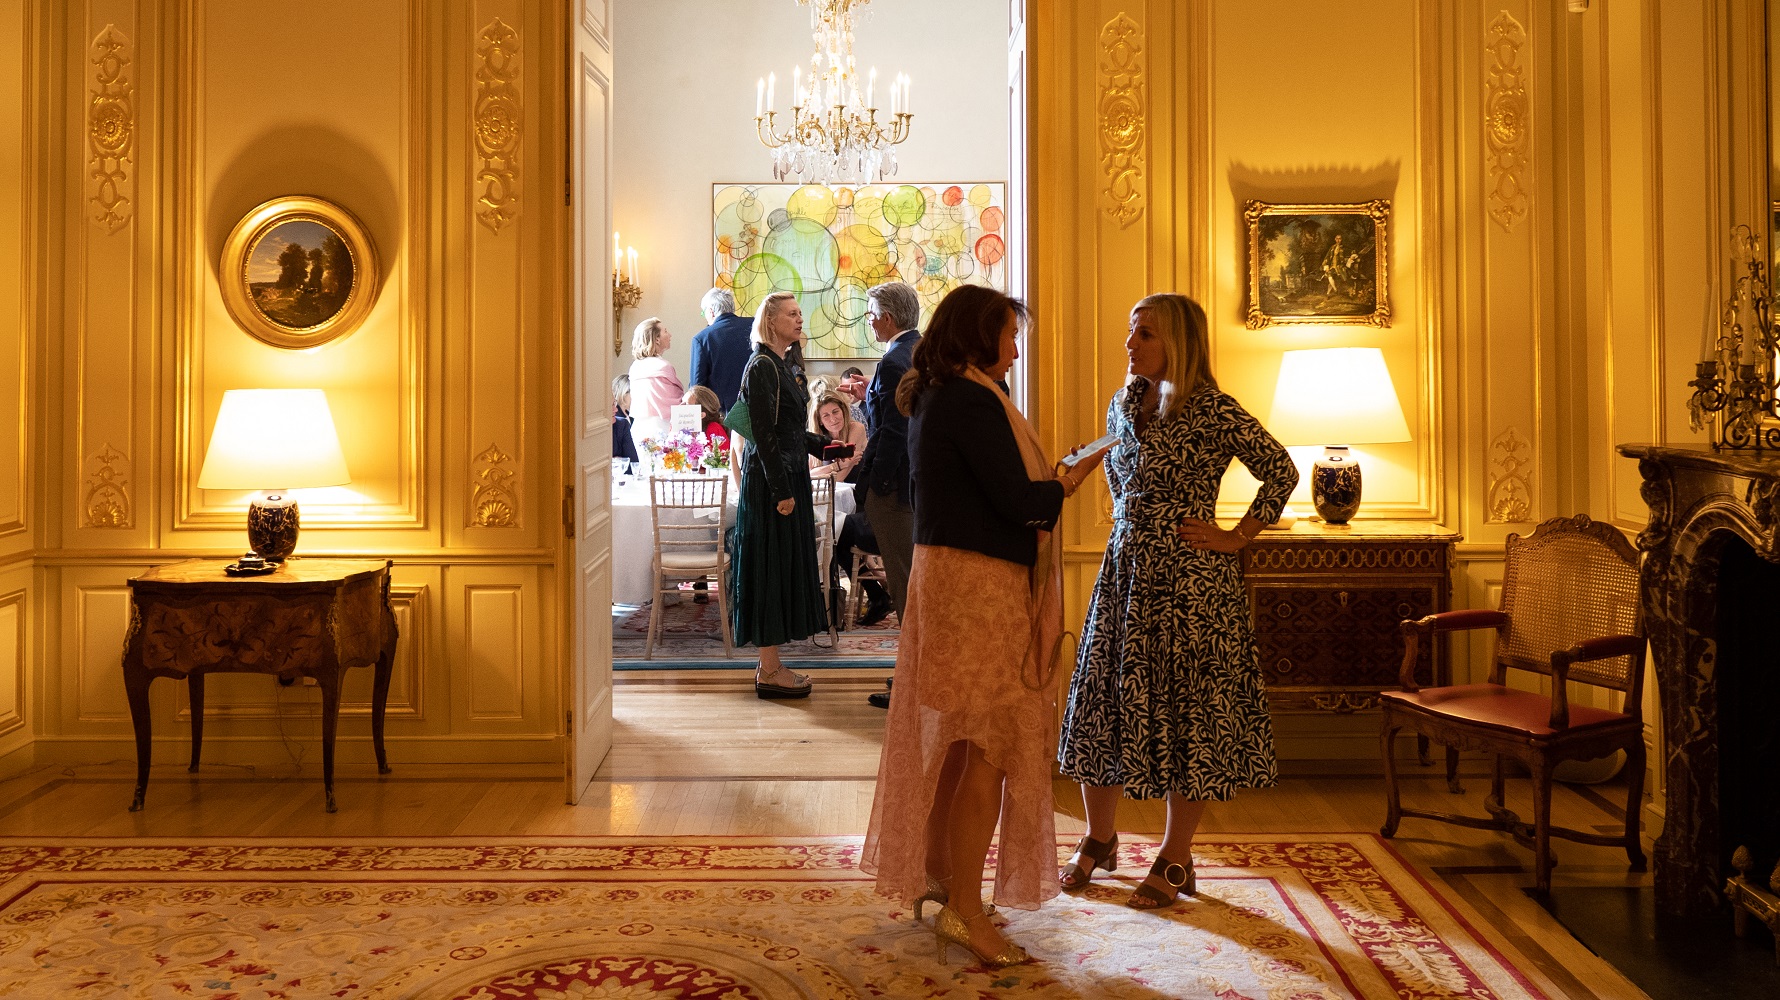 Visual aid: two women talking in the background at an event at the French Embassy in London